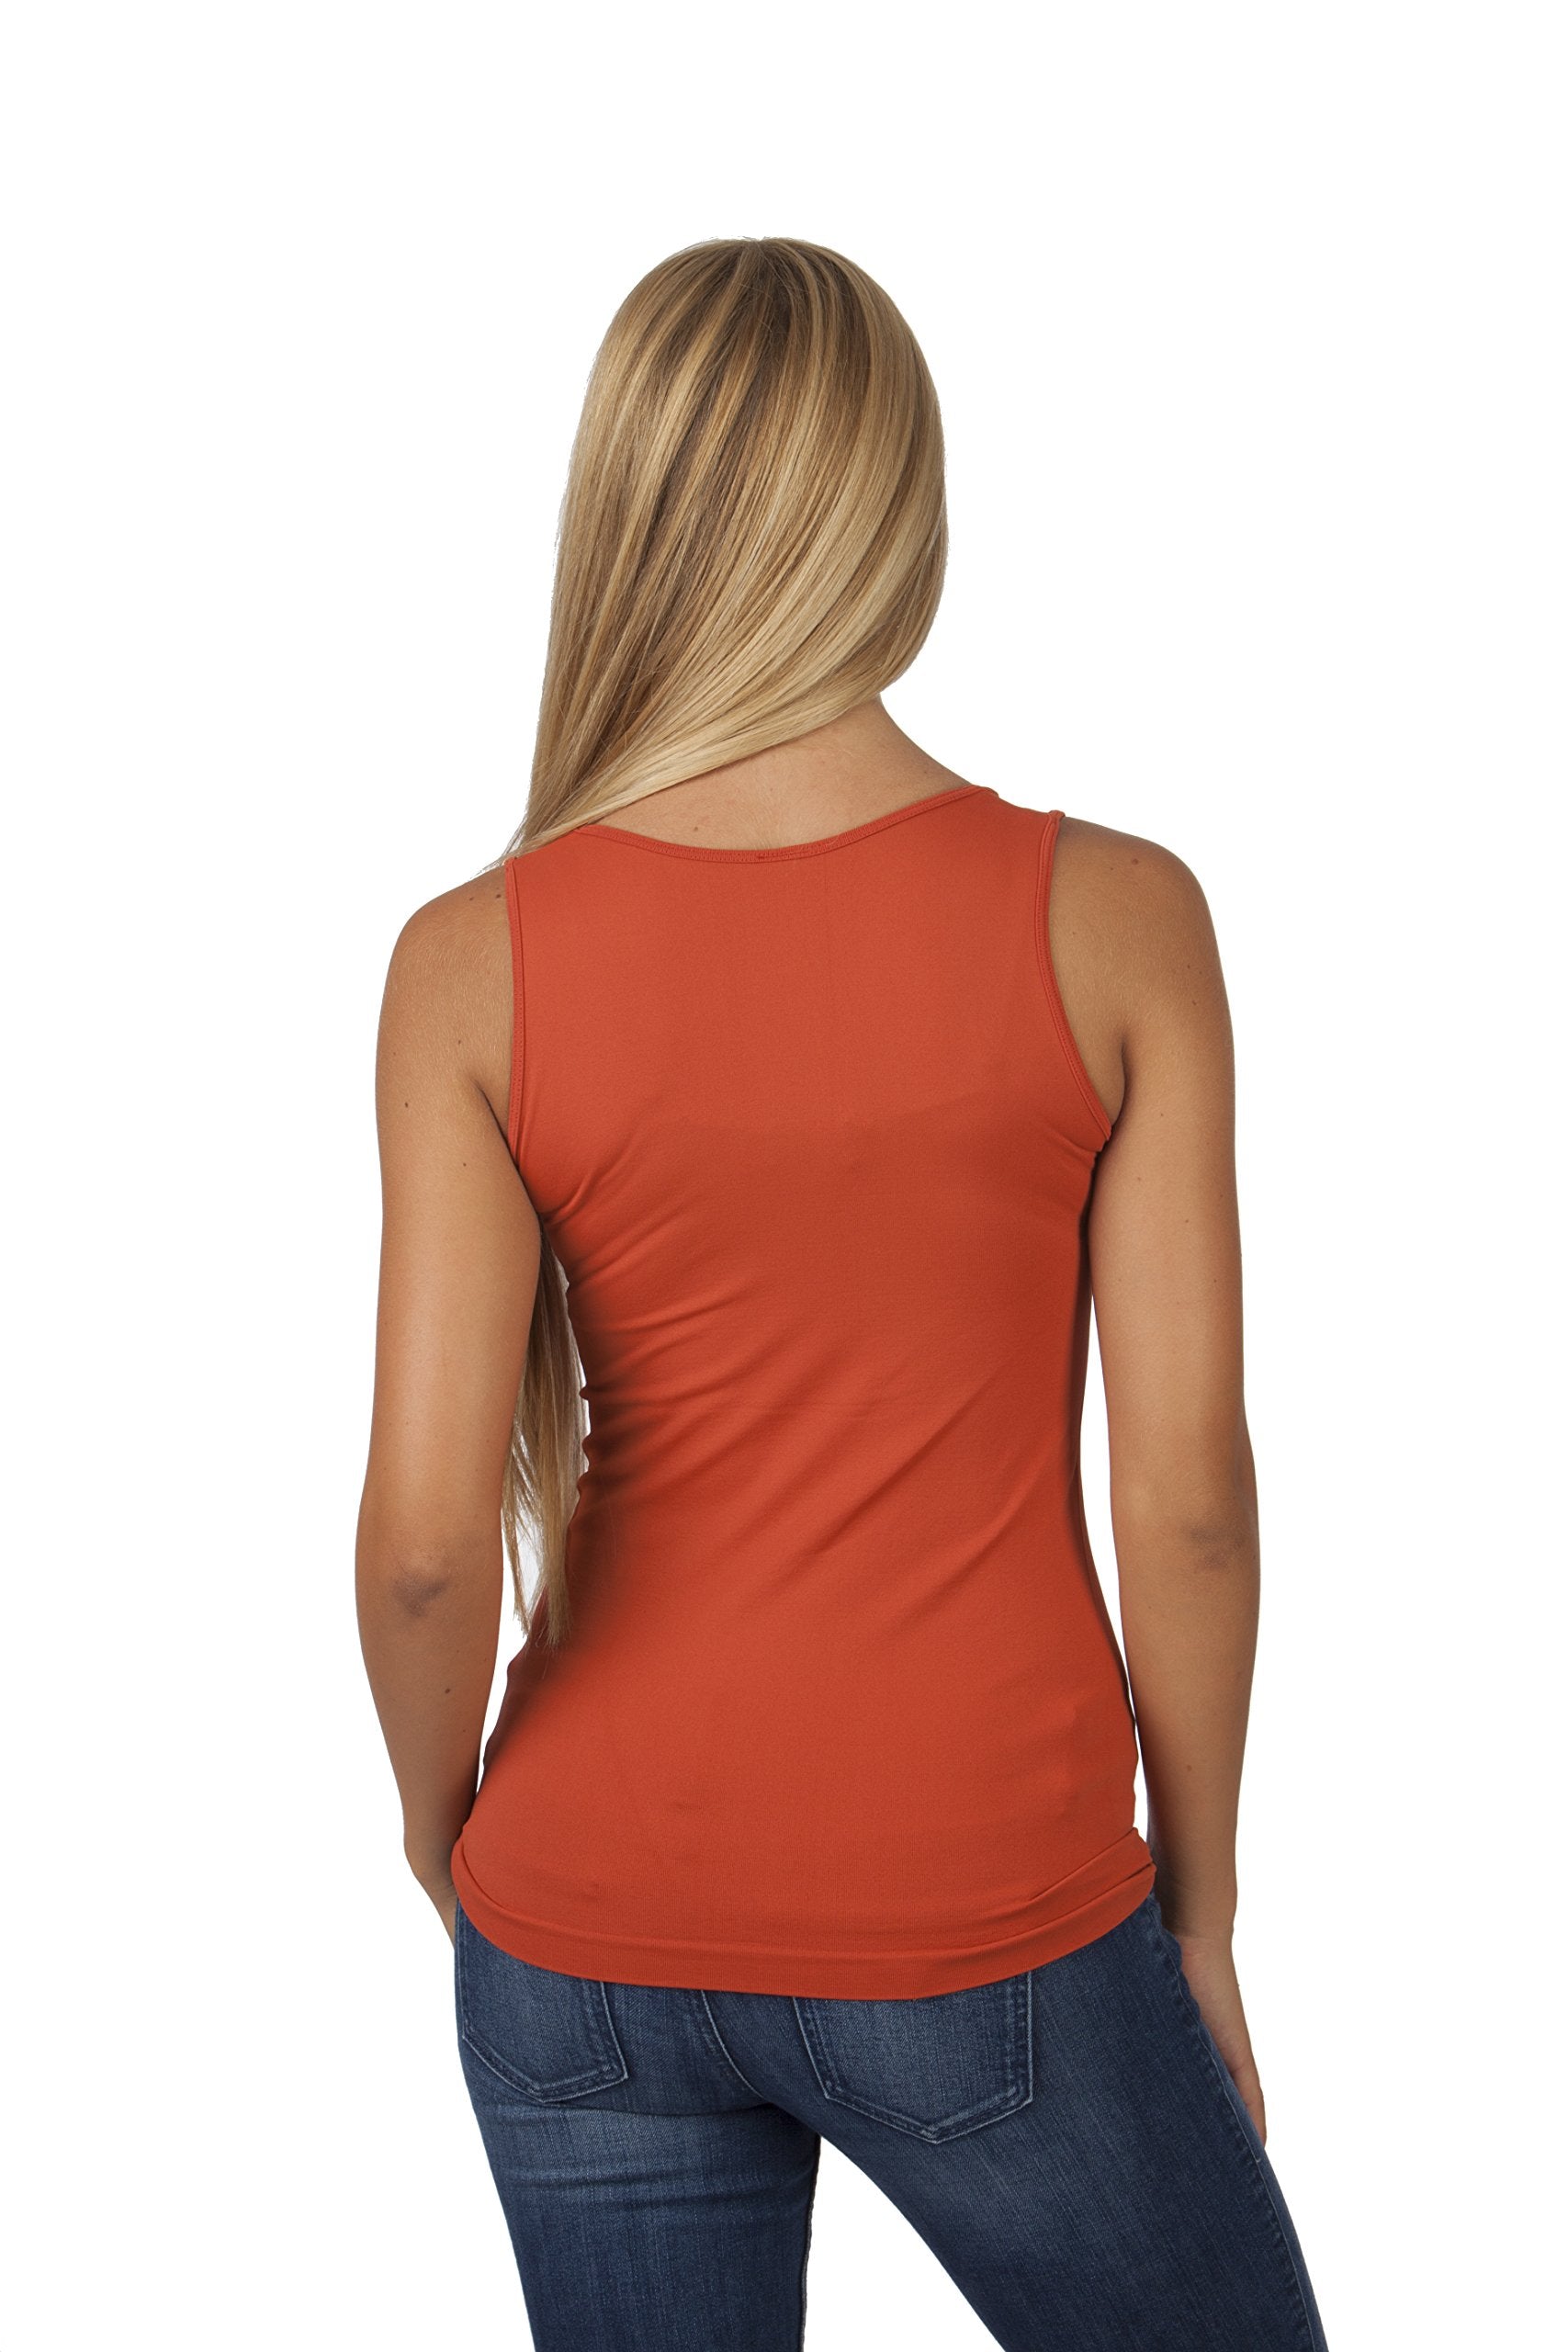 Hollywood Star Fashion Women's Long Stretch Tank Top Round Neck Full Back